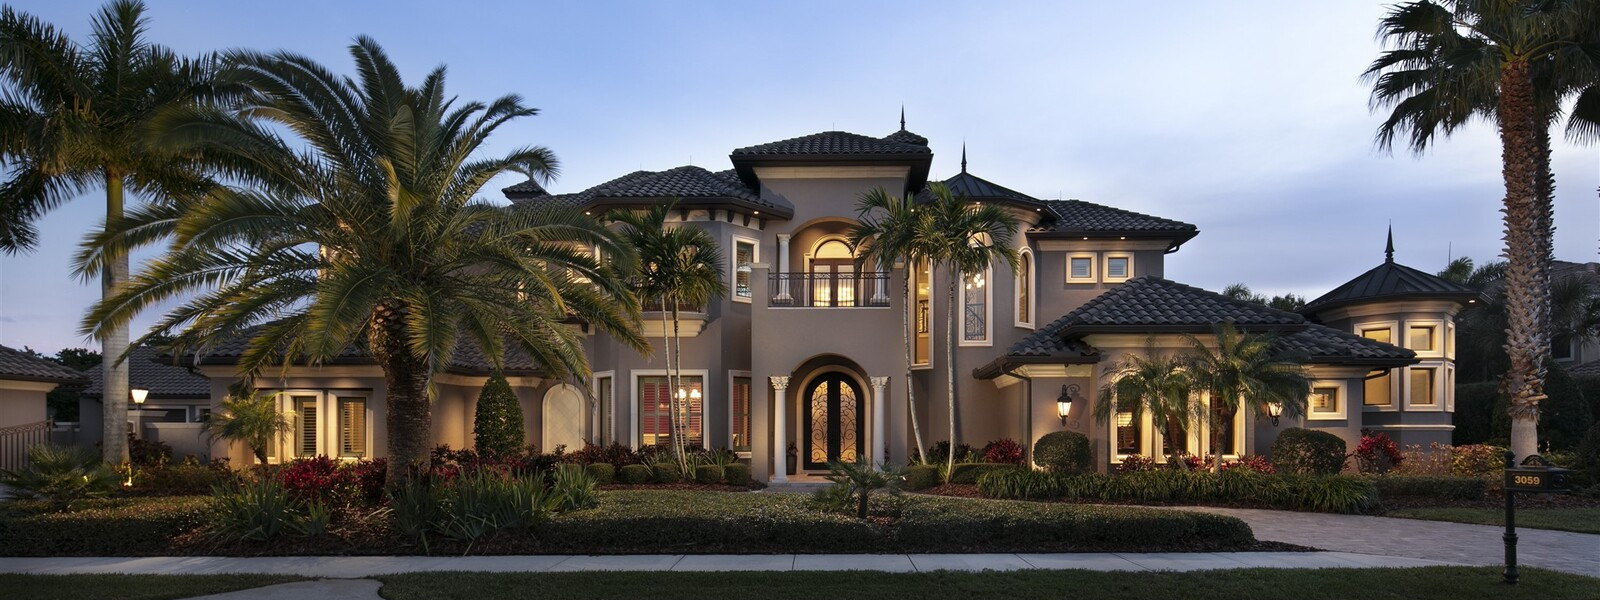 Front elevation of massive estate taken at twilight.  Palm trees in forground, light eminating from all windows and arched iron scroll double doors.  Home two story light brown with cream trim and columns.  Typical Brevard County, FL architecture